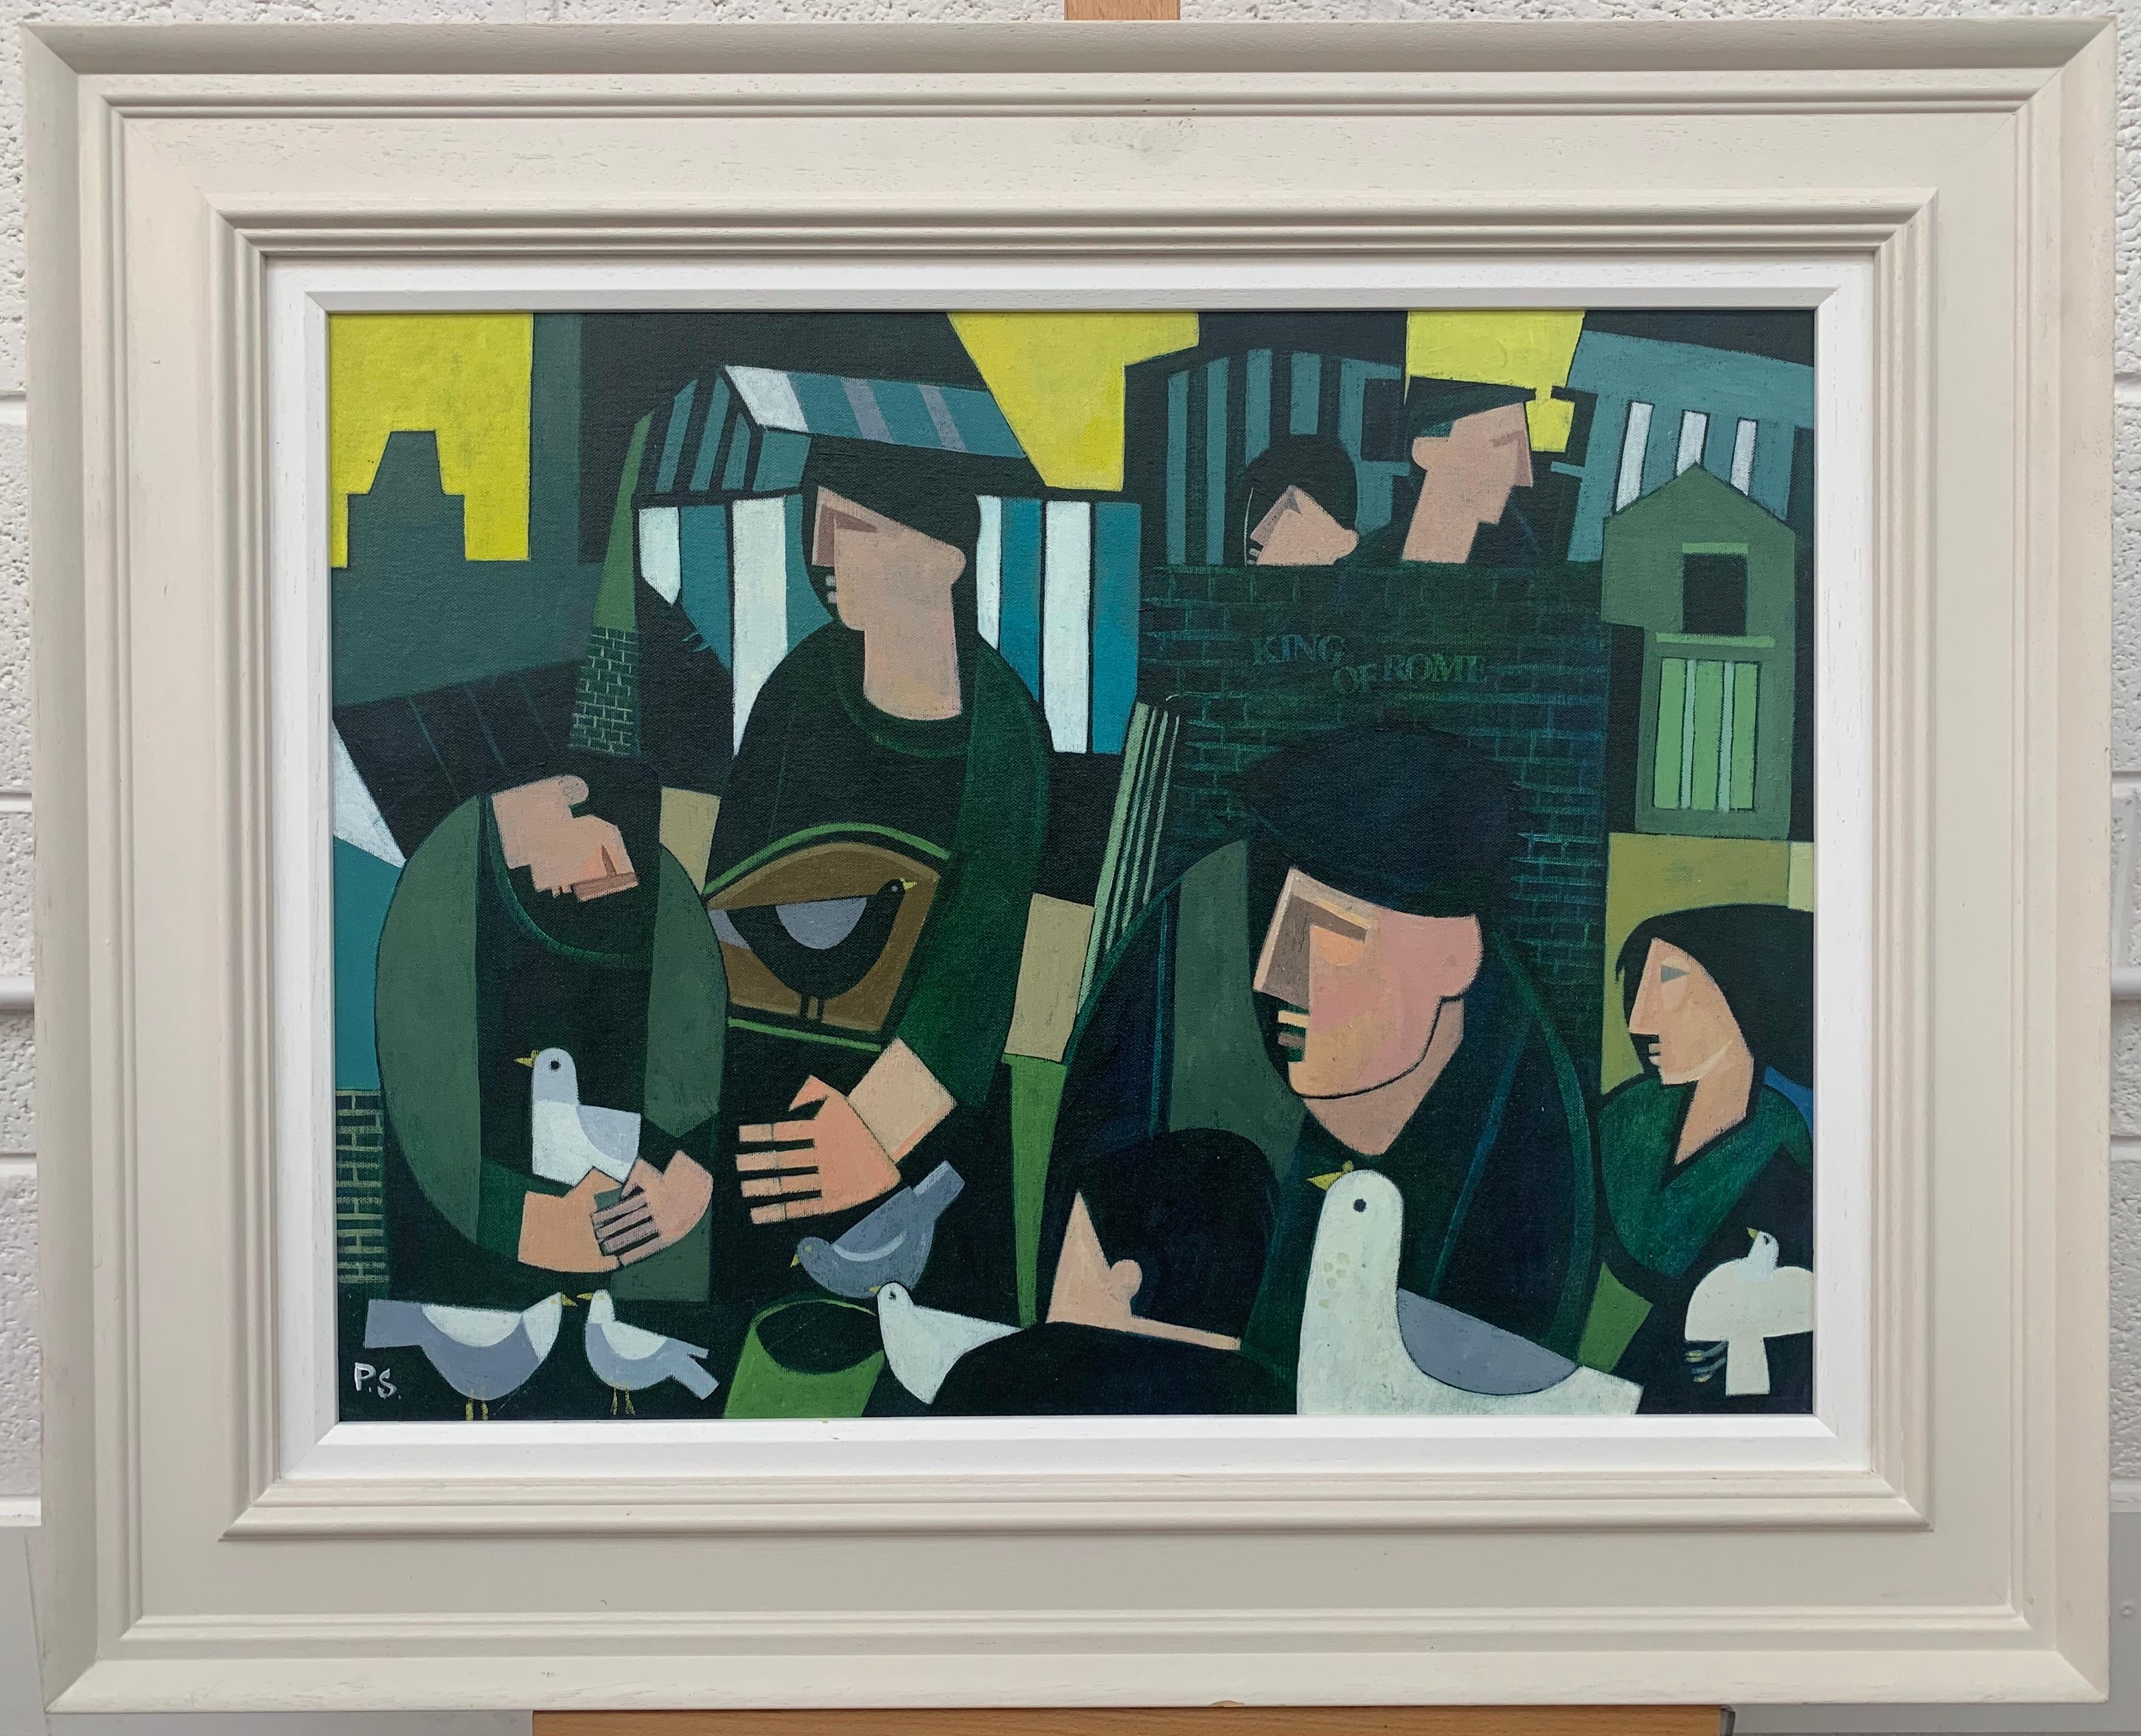 Original Painting of Pigeons with Male Figures Portraits entitled 'King of Rome' by Northern School British Artist.

Art measures 24 x 18 inches
Frame measures 29 x 23 inches

A member of Manchester Academy of Art, Stanaway’s work has been exhibited